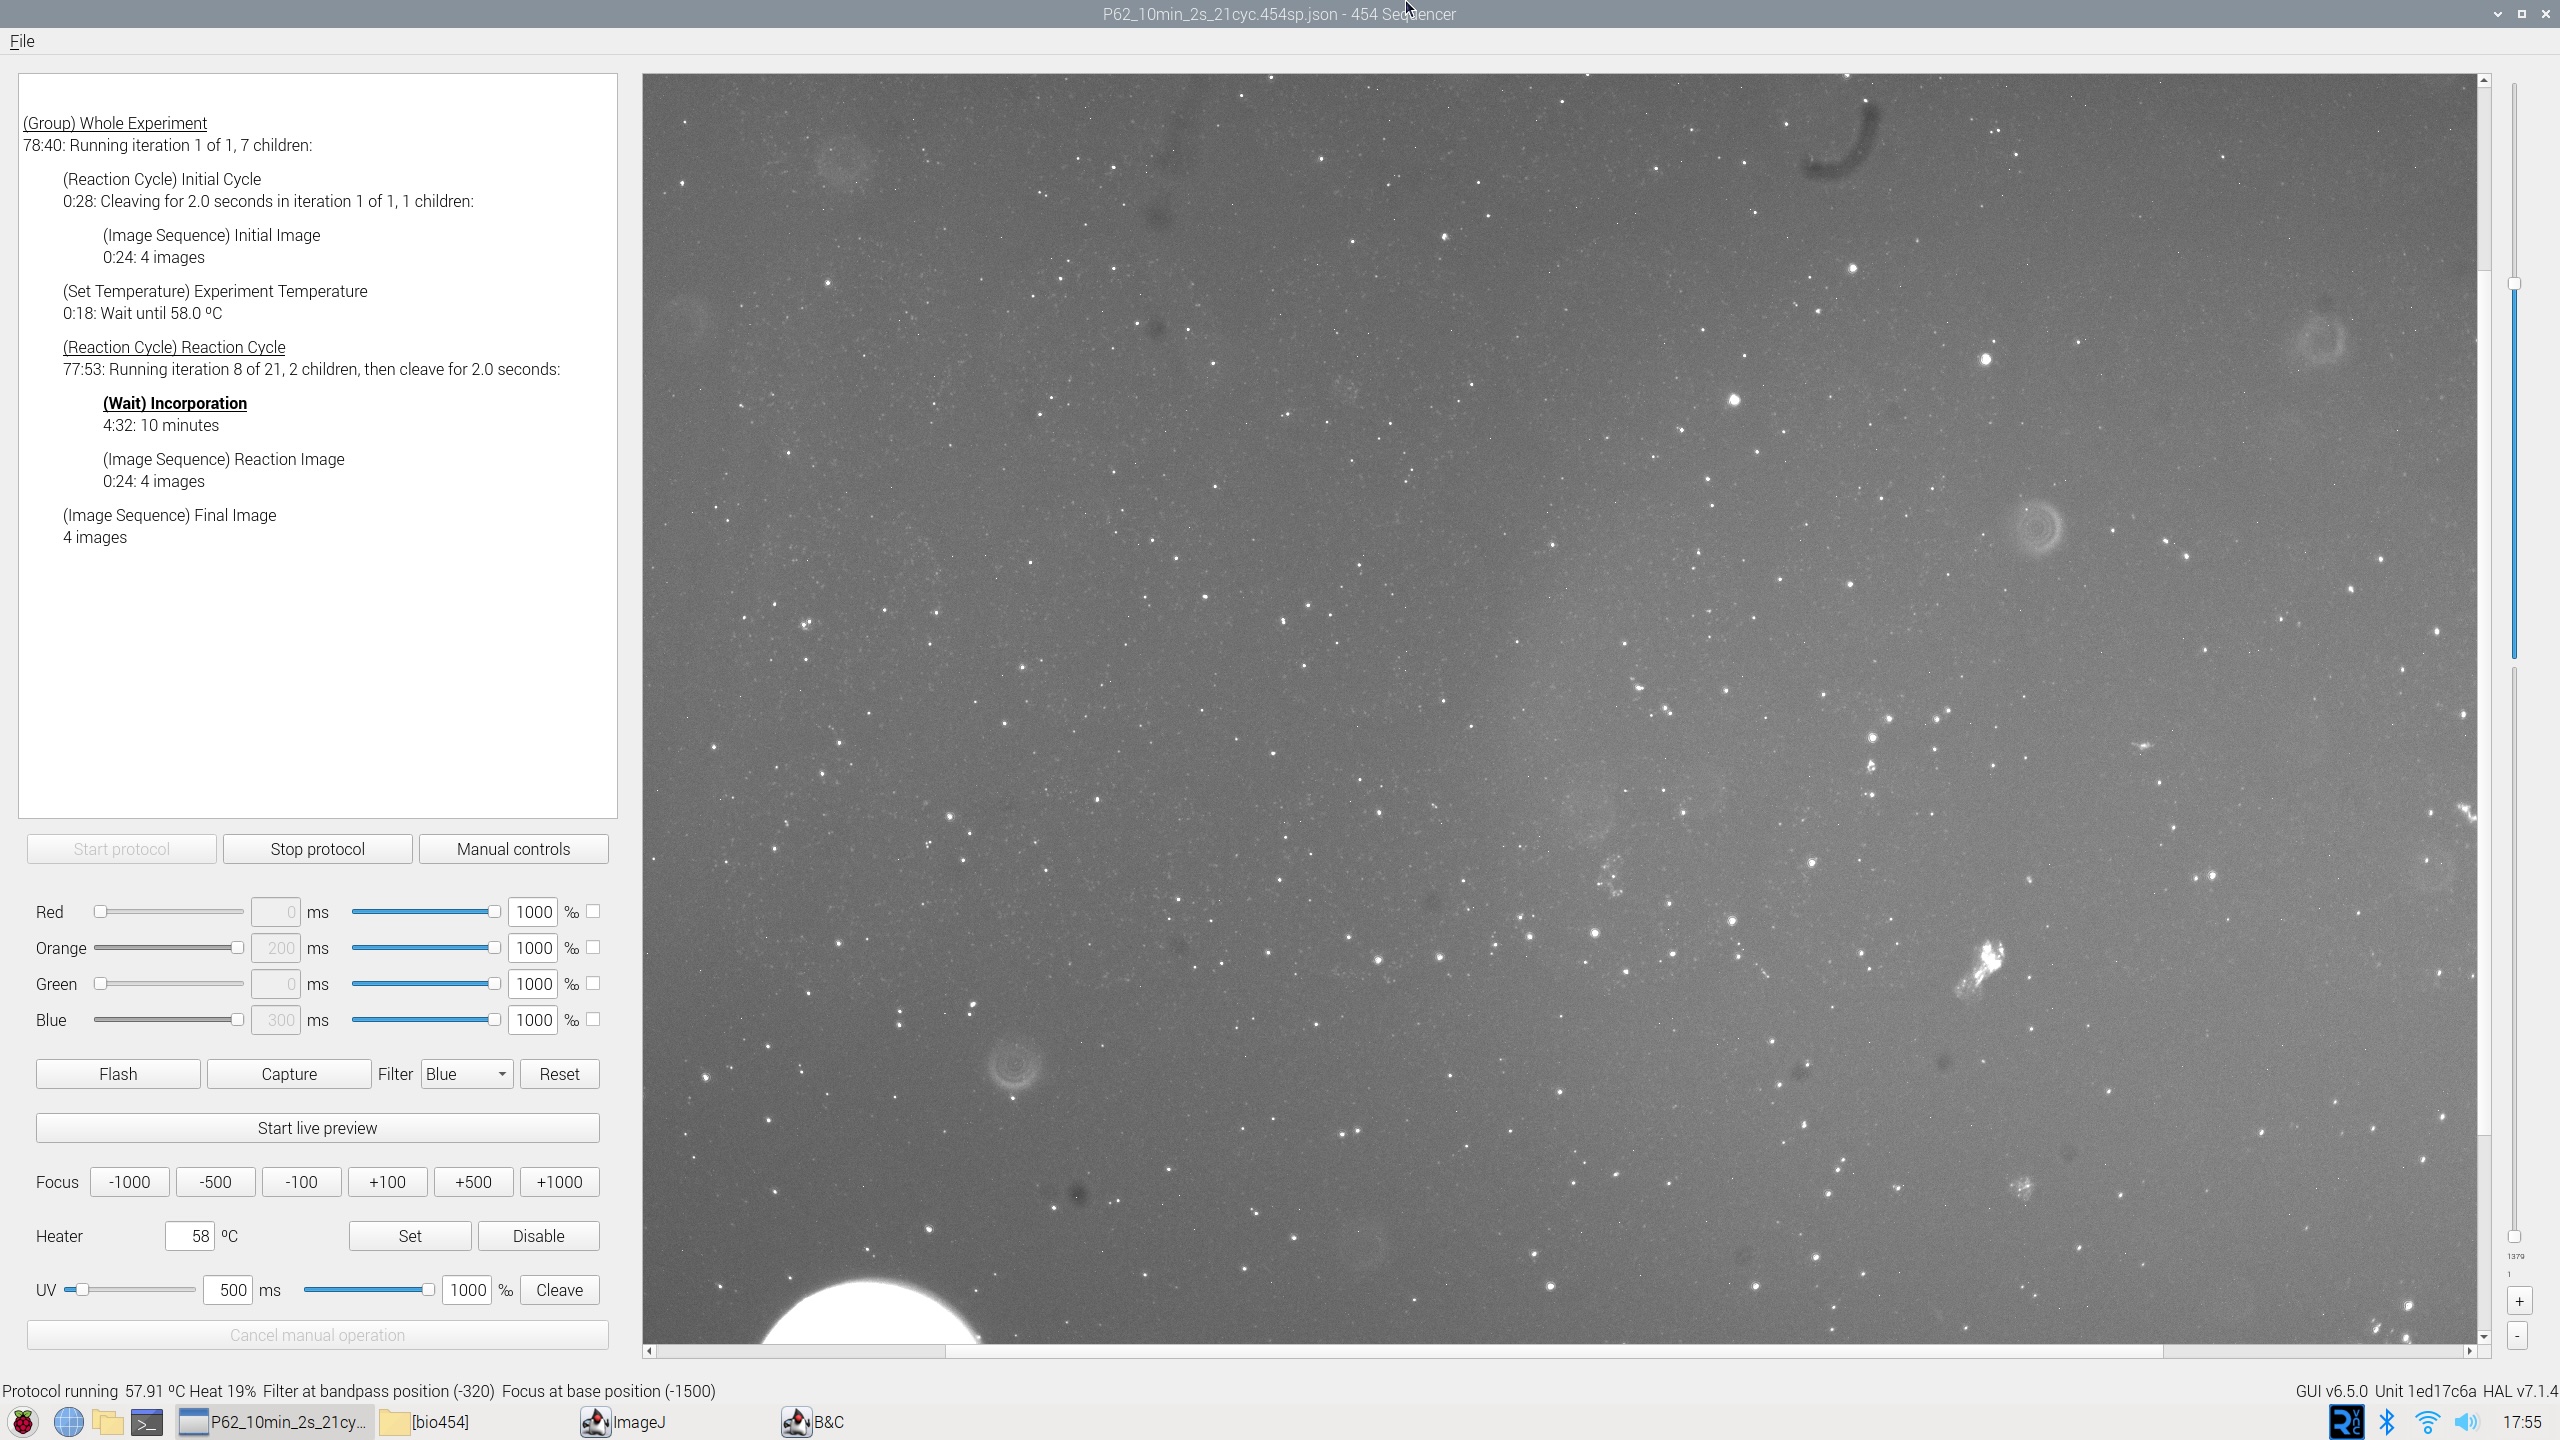 Screenshot of 454 TIRF UI, showing controls, protocol, and microscope image. Microscope image contains DNA clusters.